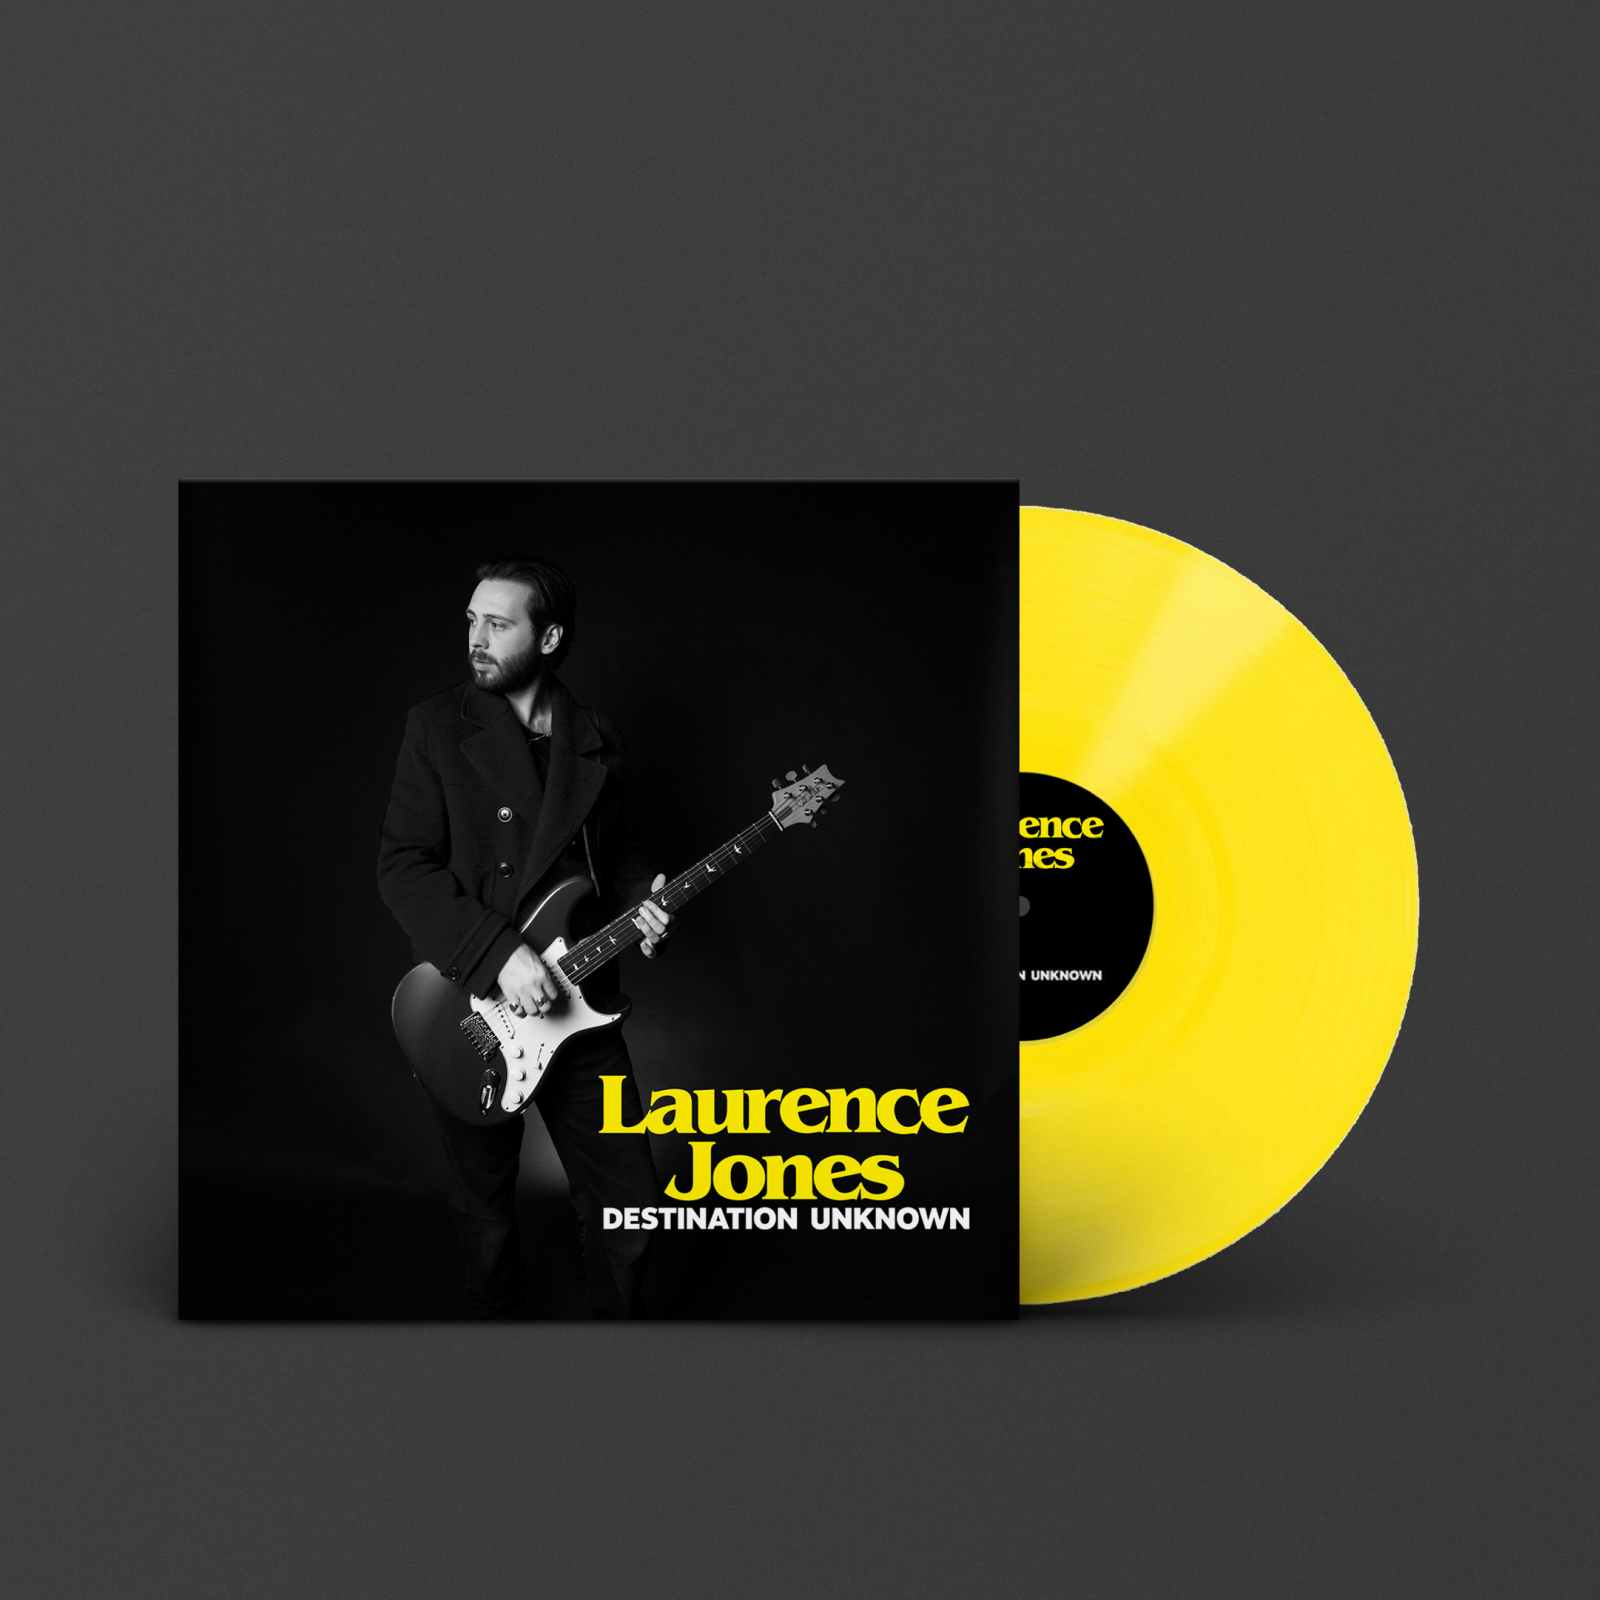 Laurence Jones's DESTINATION UNKNOWN, Marshall-powered new album featuring the soulful sound of electric blues on a limited edition yellow LP.